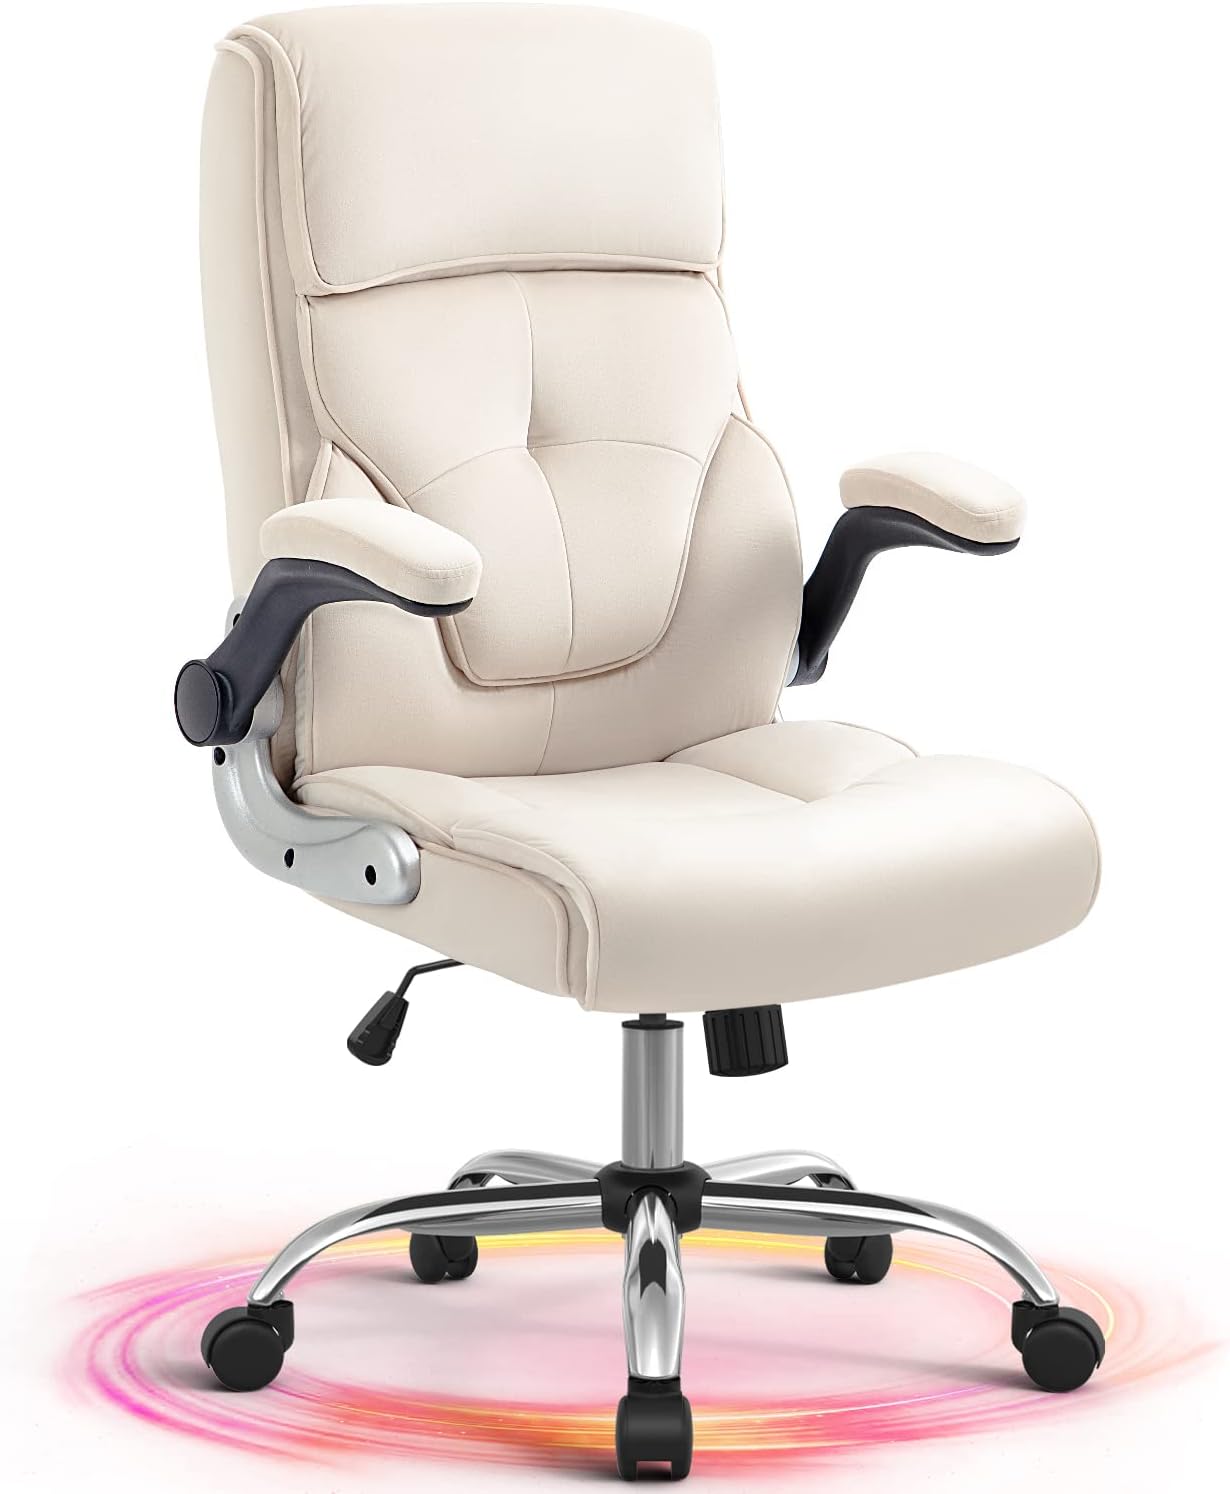 YAMASORO Ergonomic Executive Office Chair with Lumbar Support,Velvet Fabric Home Office Desk Chairs with Wheels, High Back Computer Chairs,Beige